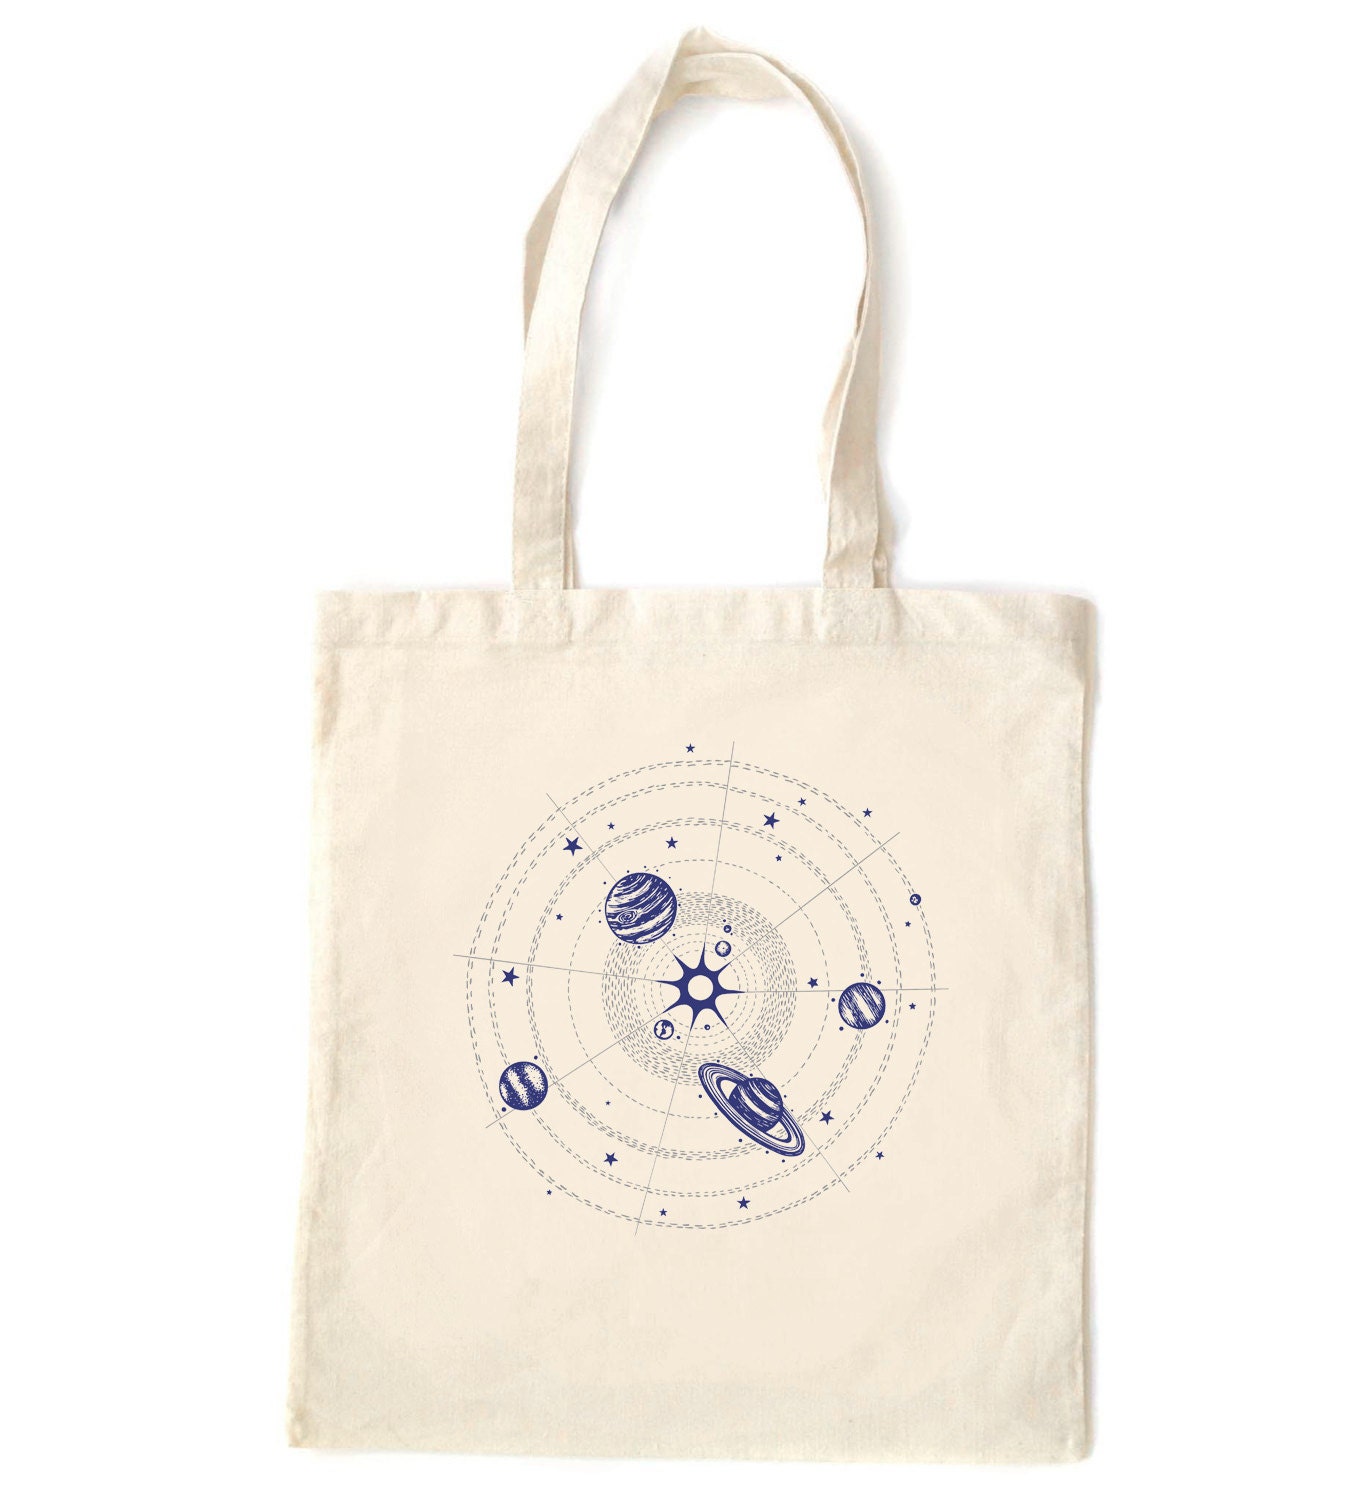 Solar System tote bag cotton fabric glow in the dark